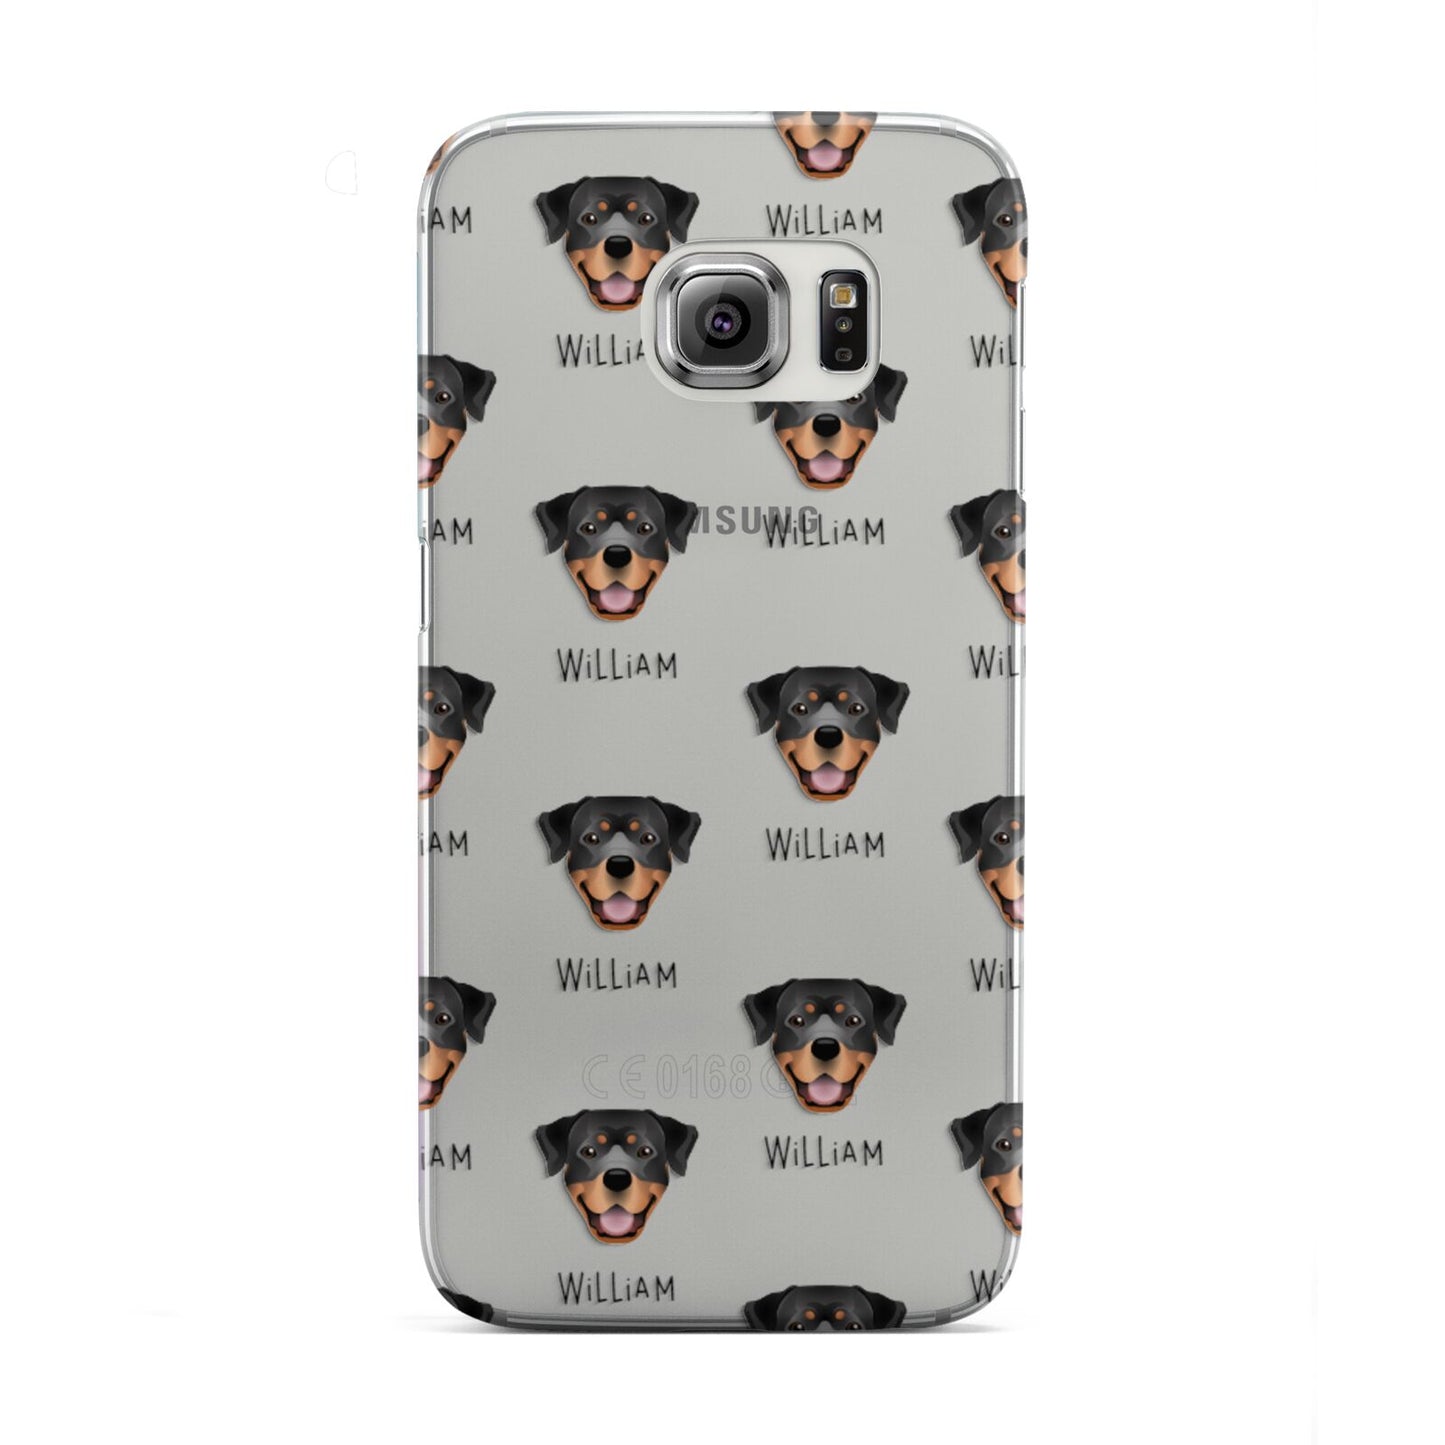 Rottweiler Icon with Name Samsung Galaxy S6 Edge Case